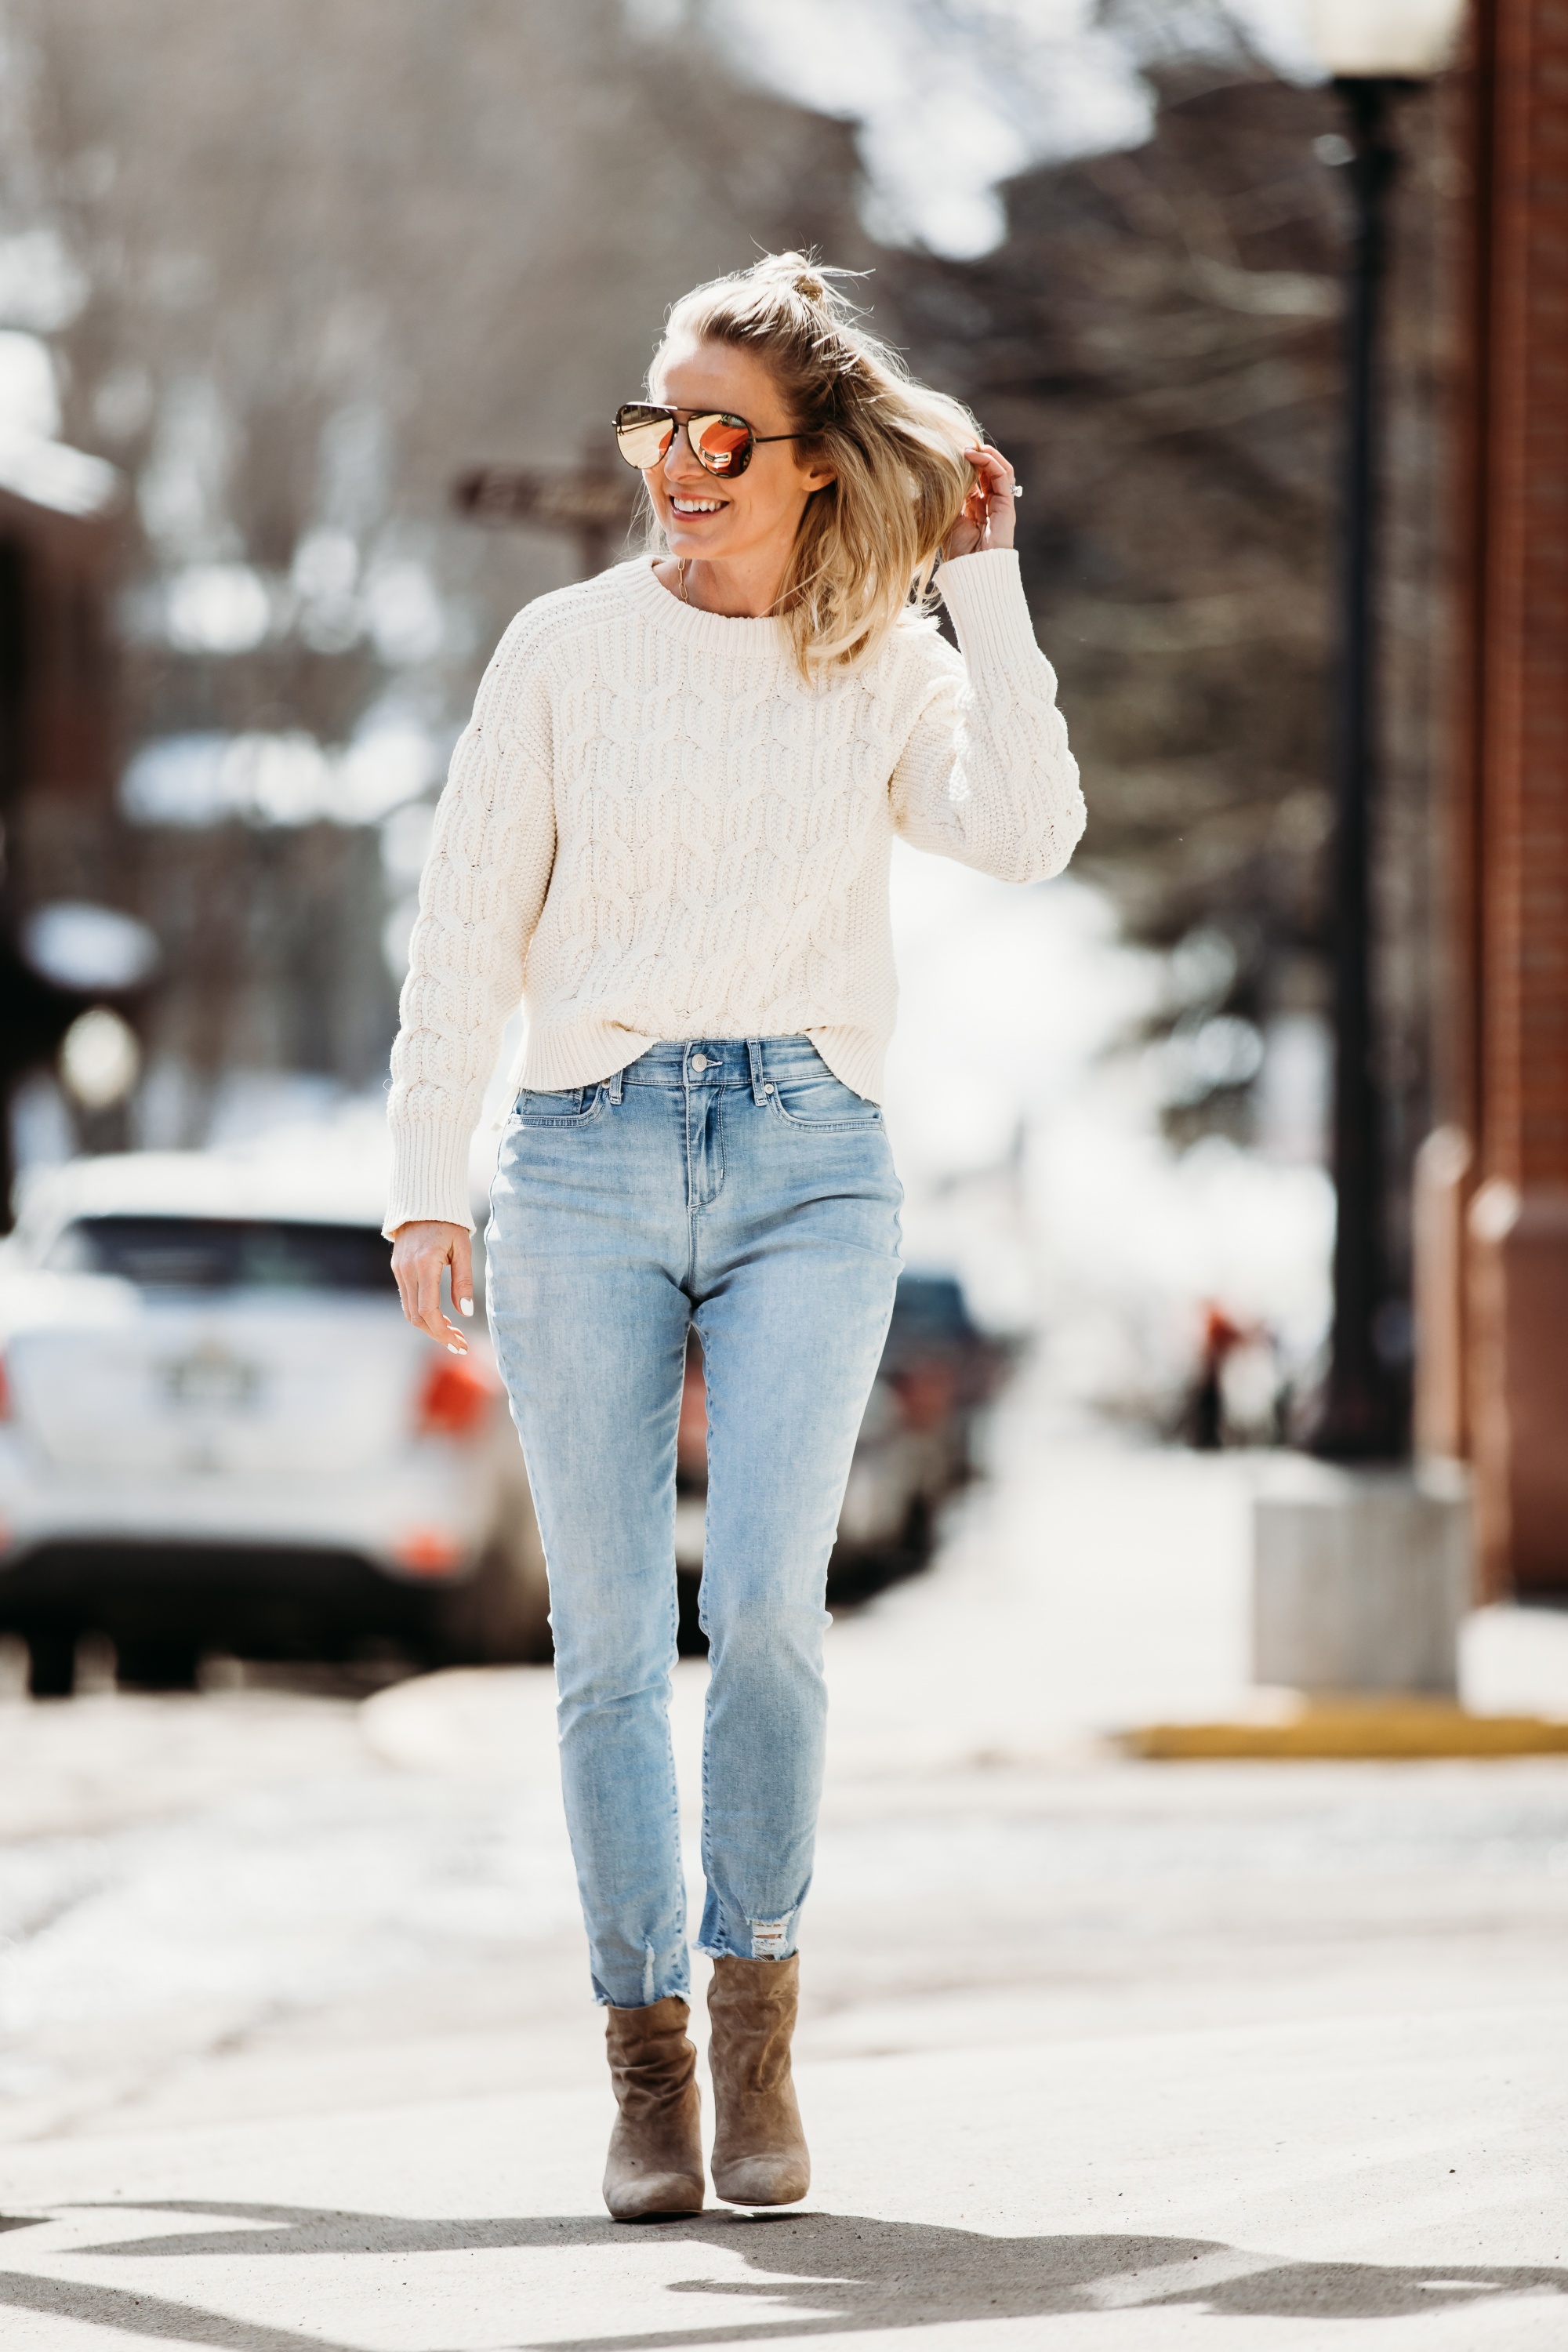 White Sweaters, Fashion blogger Erin Busbee of BusbeeStyle.com wearing a white cable knit sweater by Scoop, light wash skinny jeans by Sofia Vergara, brown suede booties, and green mirrored QUAY sunglasses from Walmart walking in Telluride, Colorado